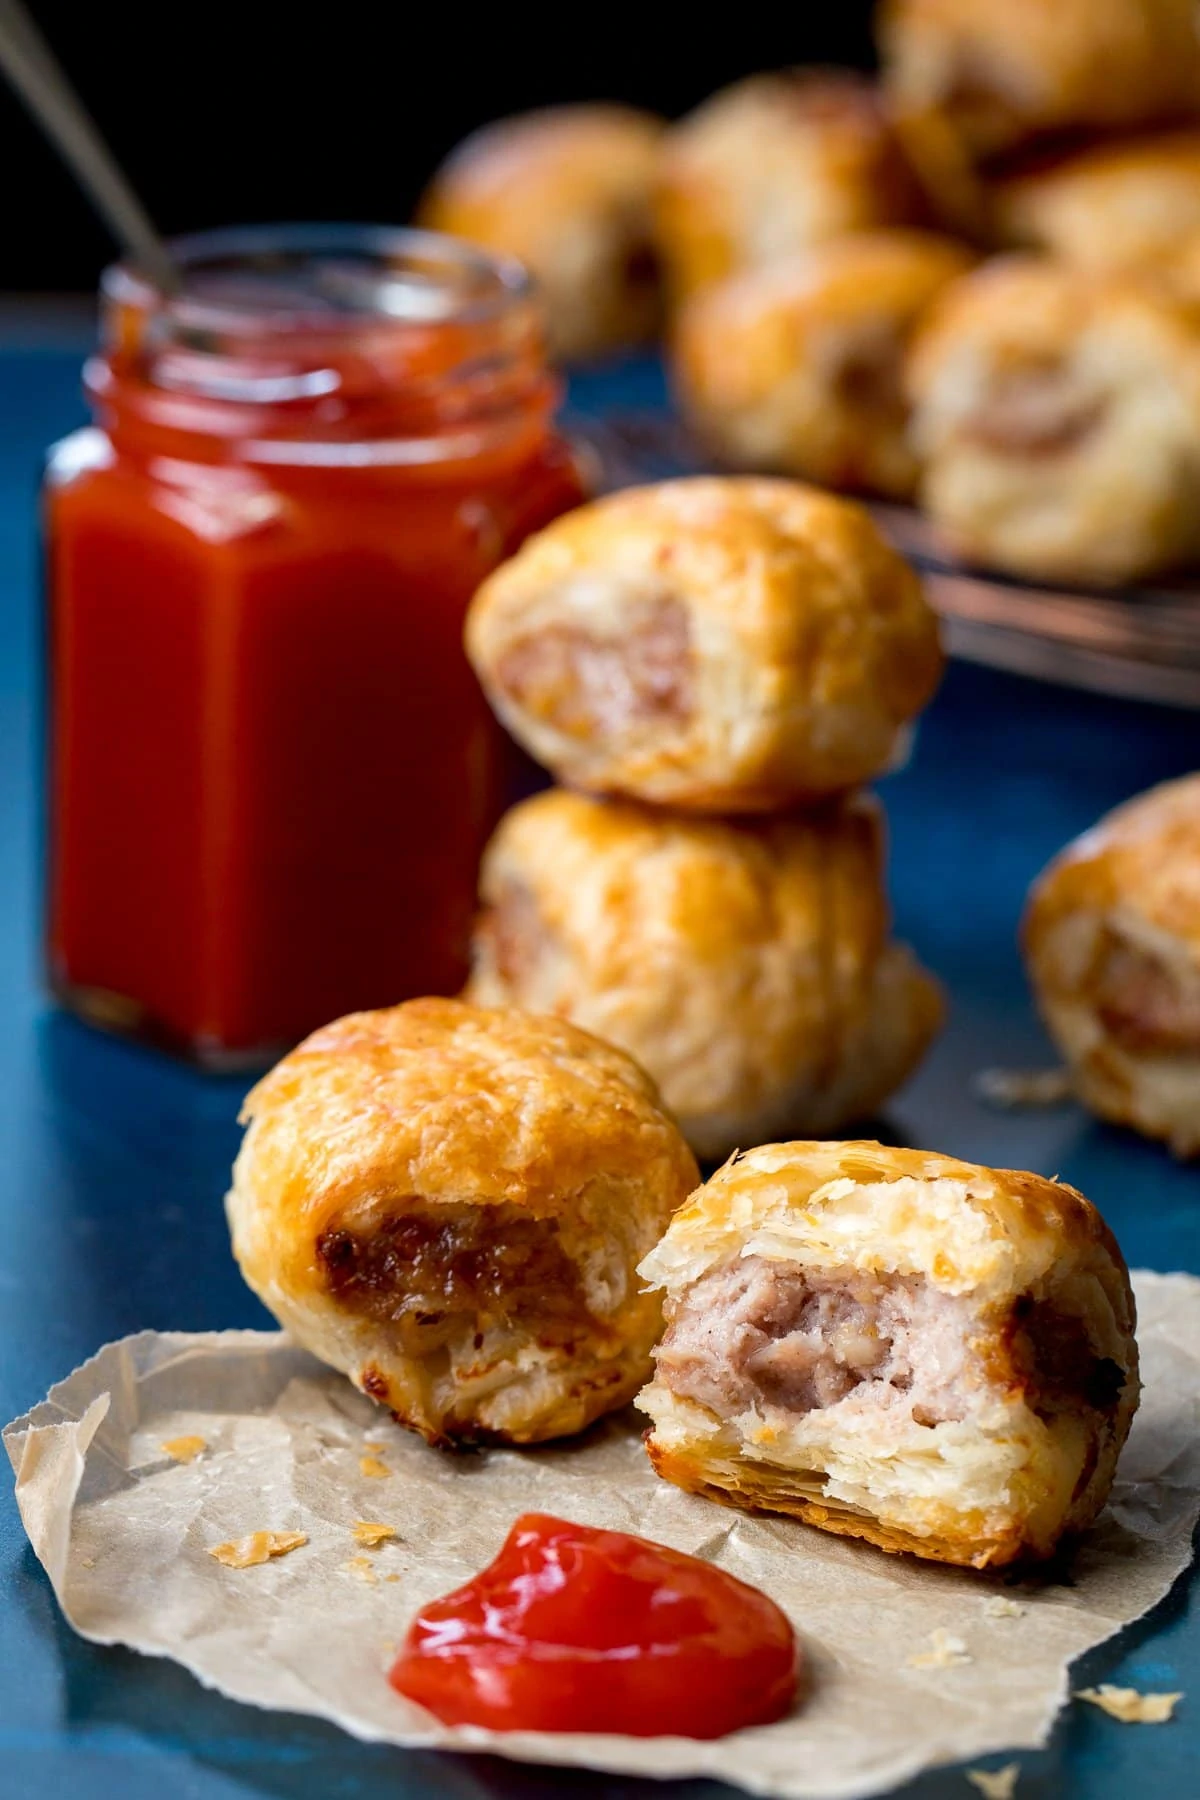 Sausage rolls and a blob of ketchup on a piece of parchment. Bite taken out of one of the sausage rolls.